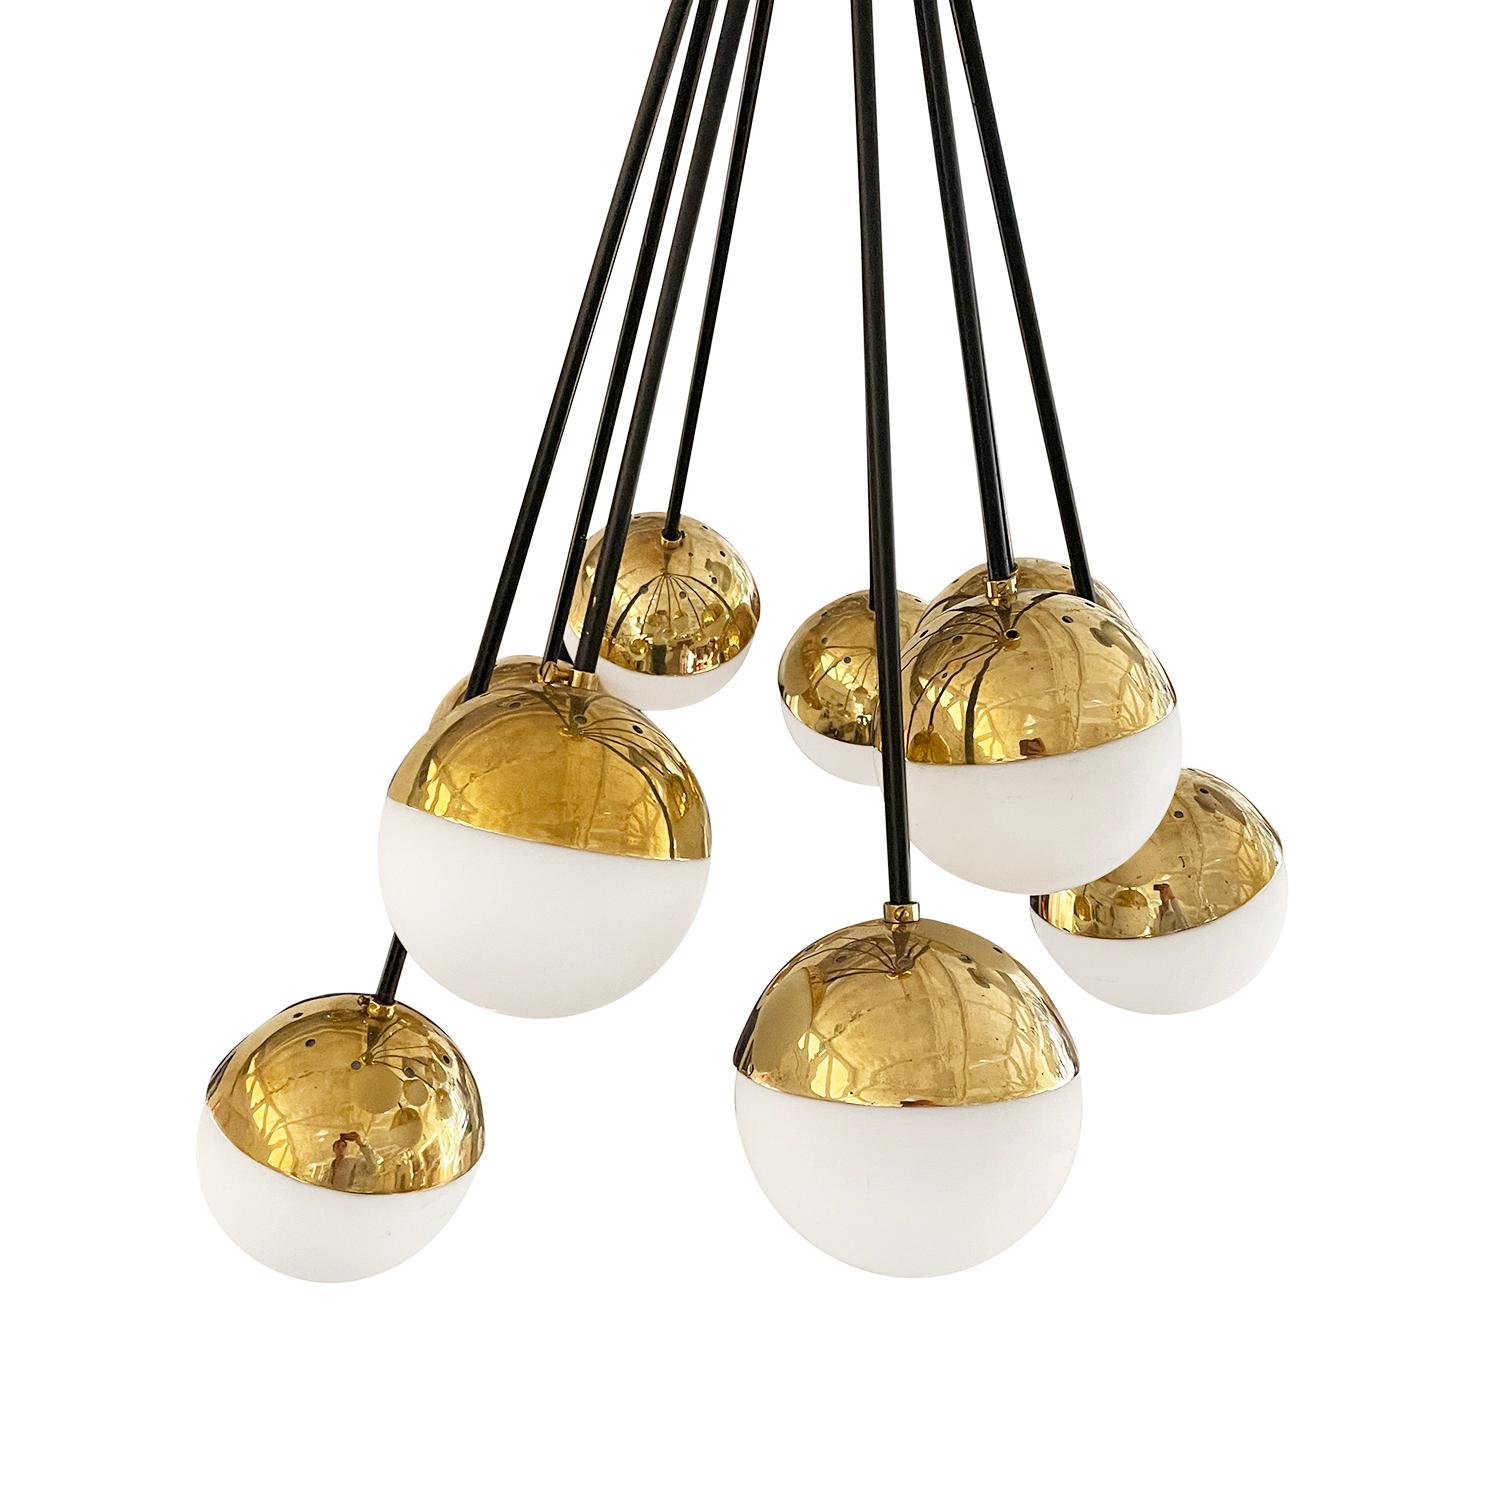 A gold-white, vintage Mid-Century Modern Italian chandelier, pendant made of hand crafted polished brass, designed and produced by Stilnovo in good condition. The small round sputnik ceiling light, lamp is composed with nine frosted opaline glass